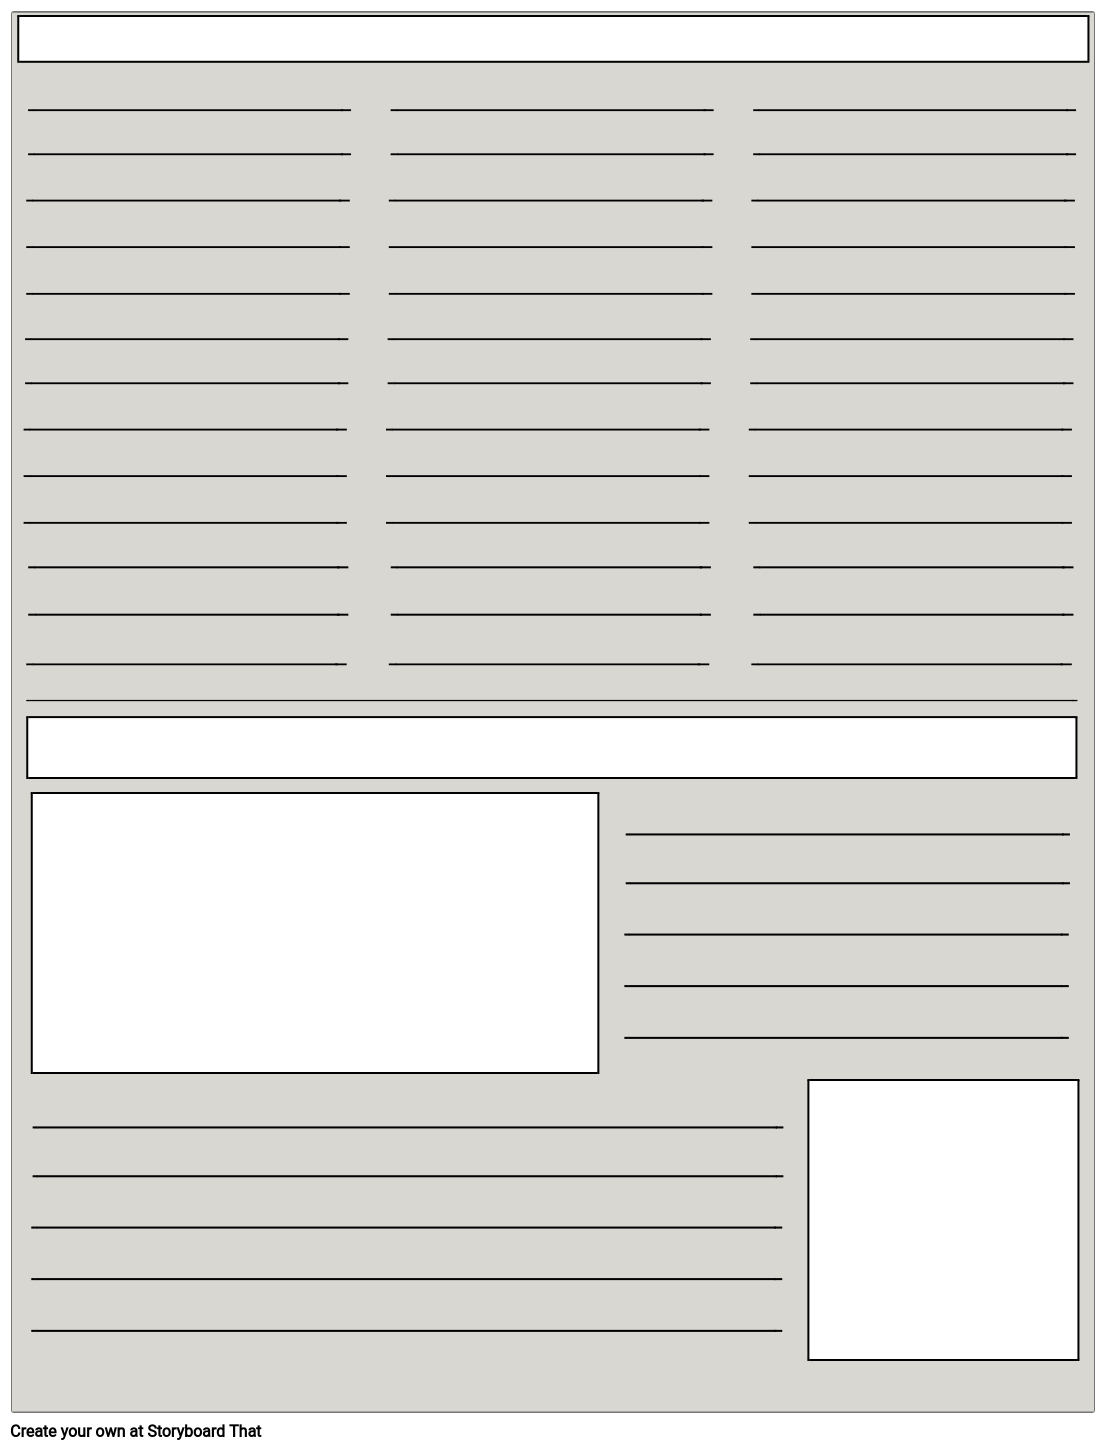 Newspaper Page Storyboard By Worksheet templates